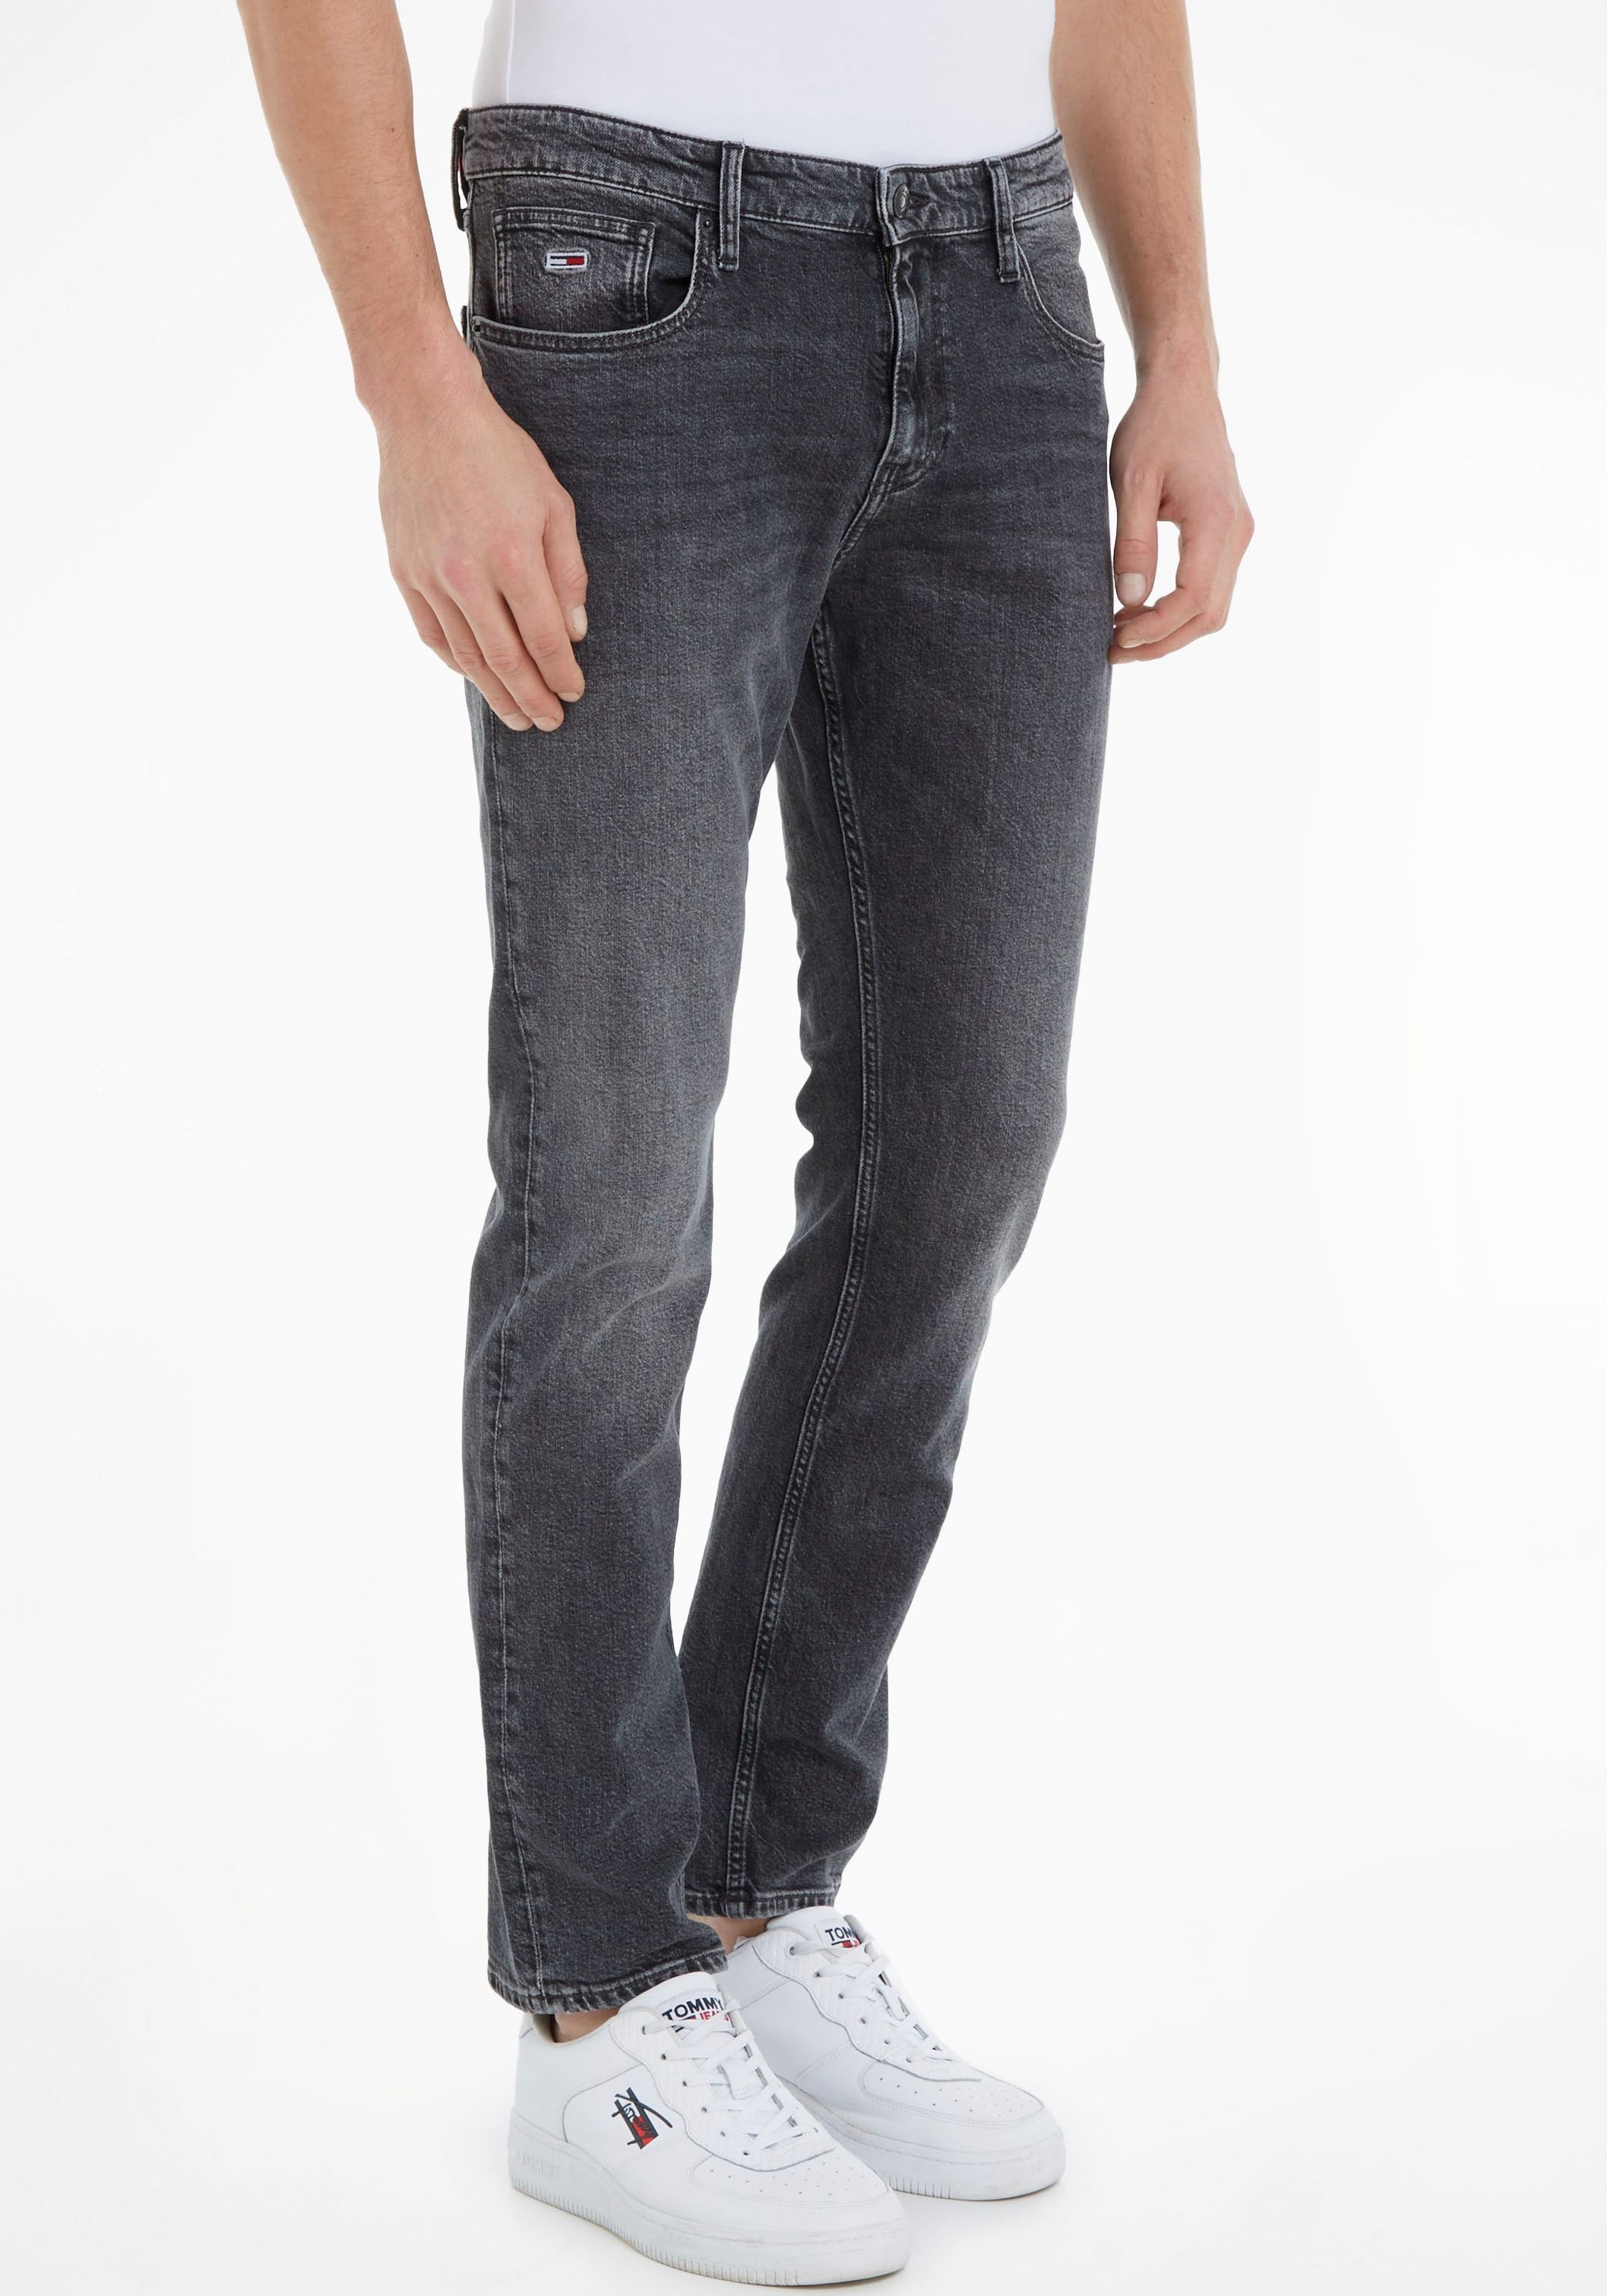 »RYAN bei 5-Pocket-Jeans STRGHT« kaufen online RGLR Jeans Tommy OTTO